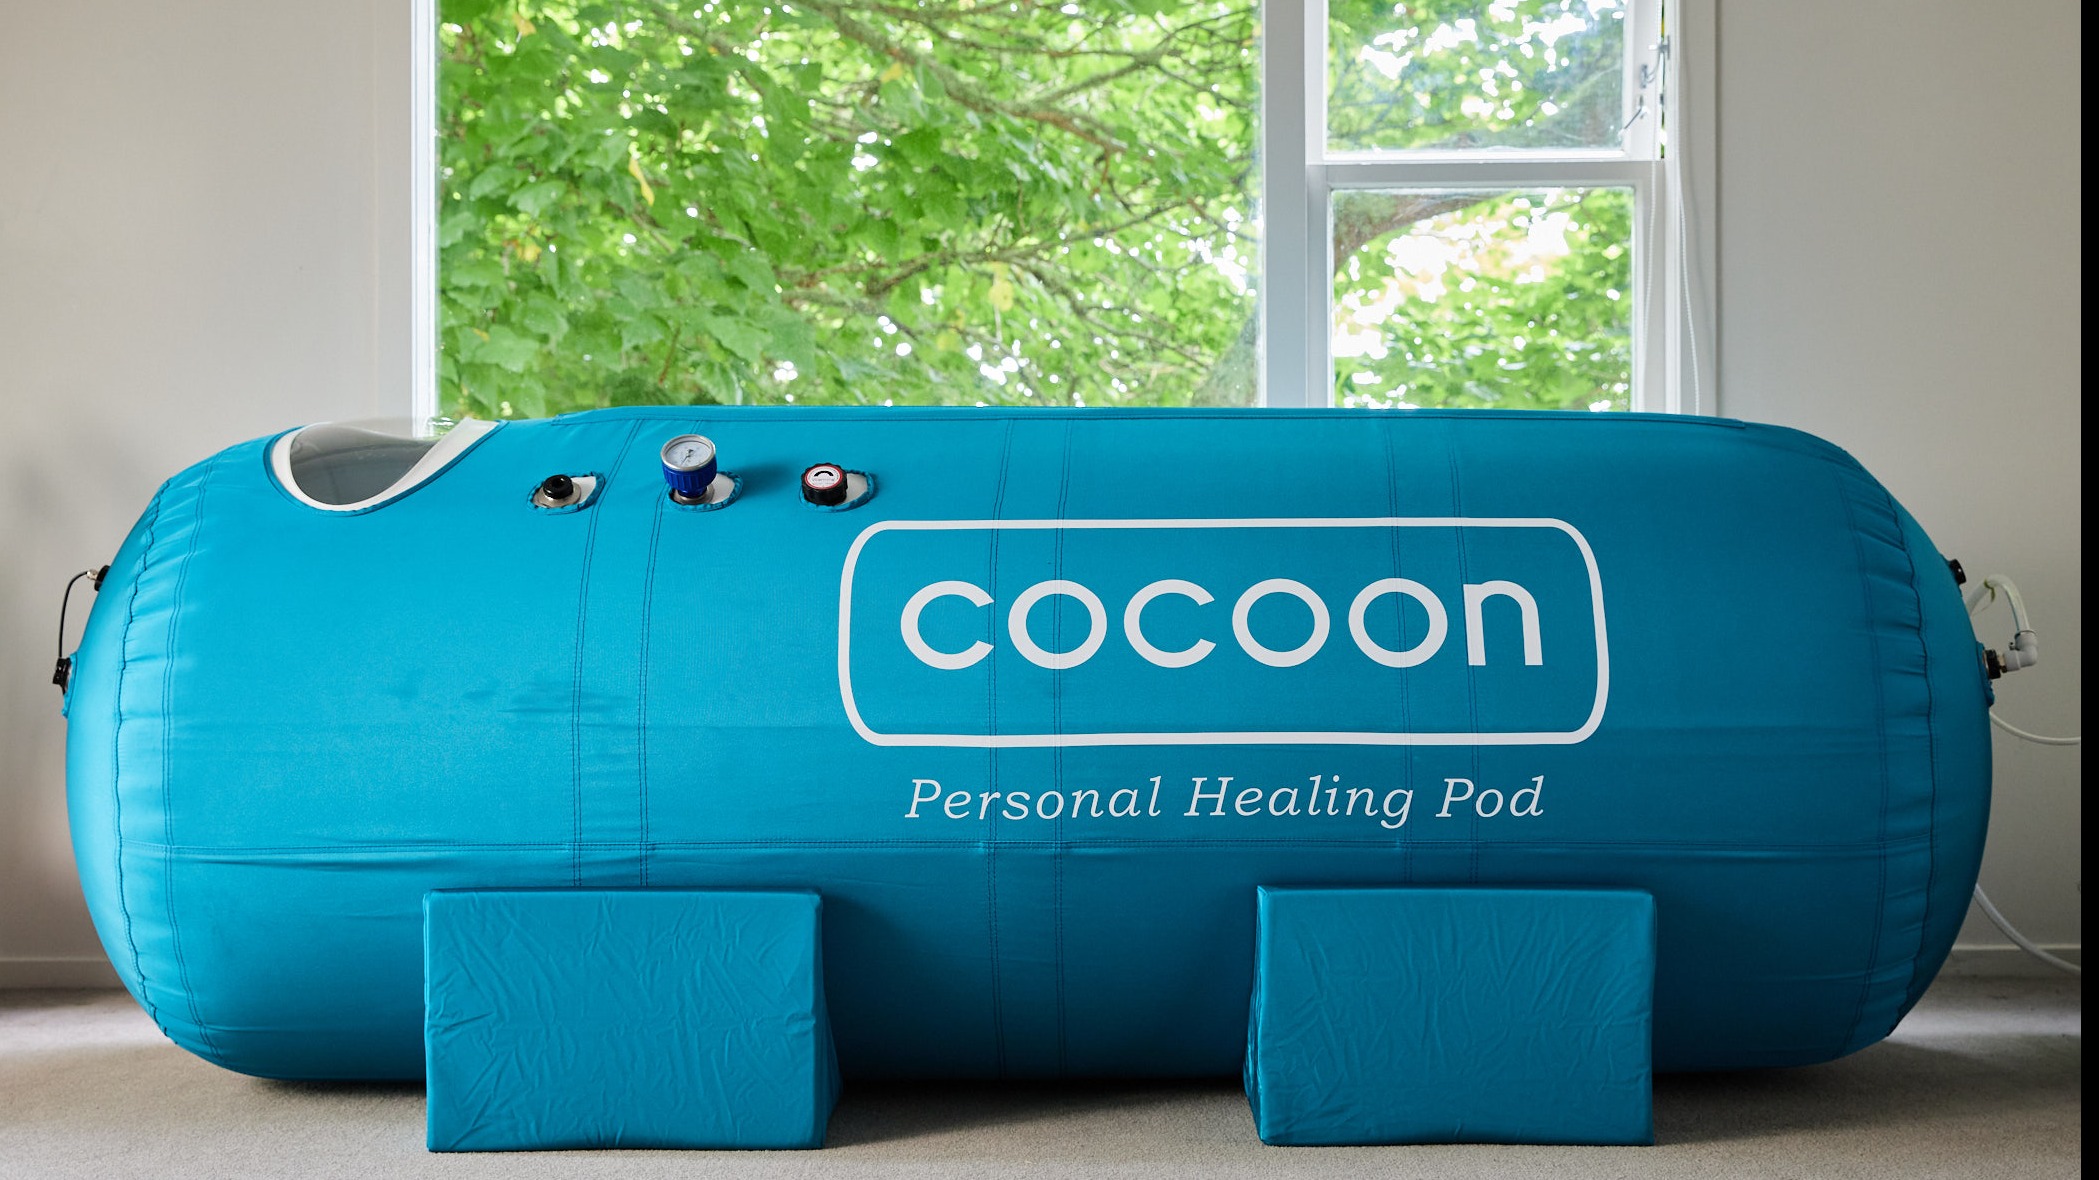 Cocoon Healing Pod for Hyperbaric Treatment